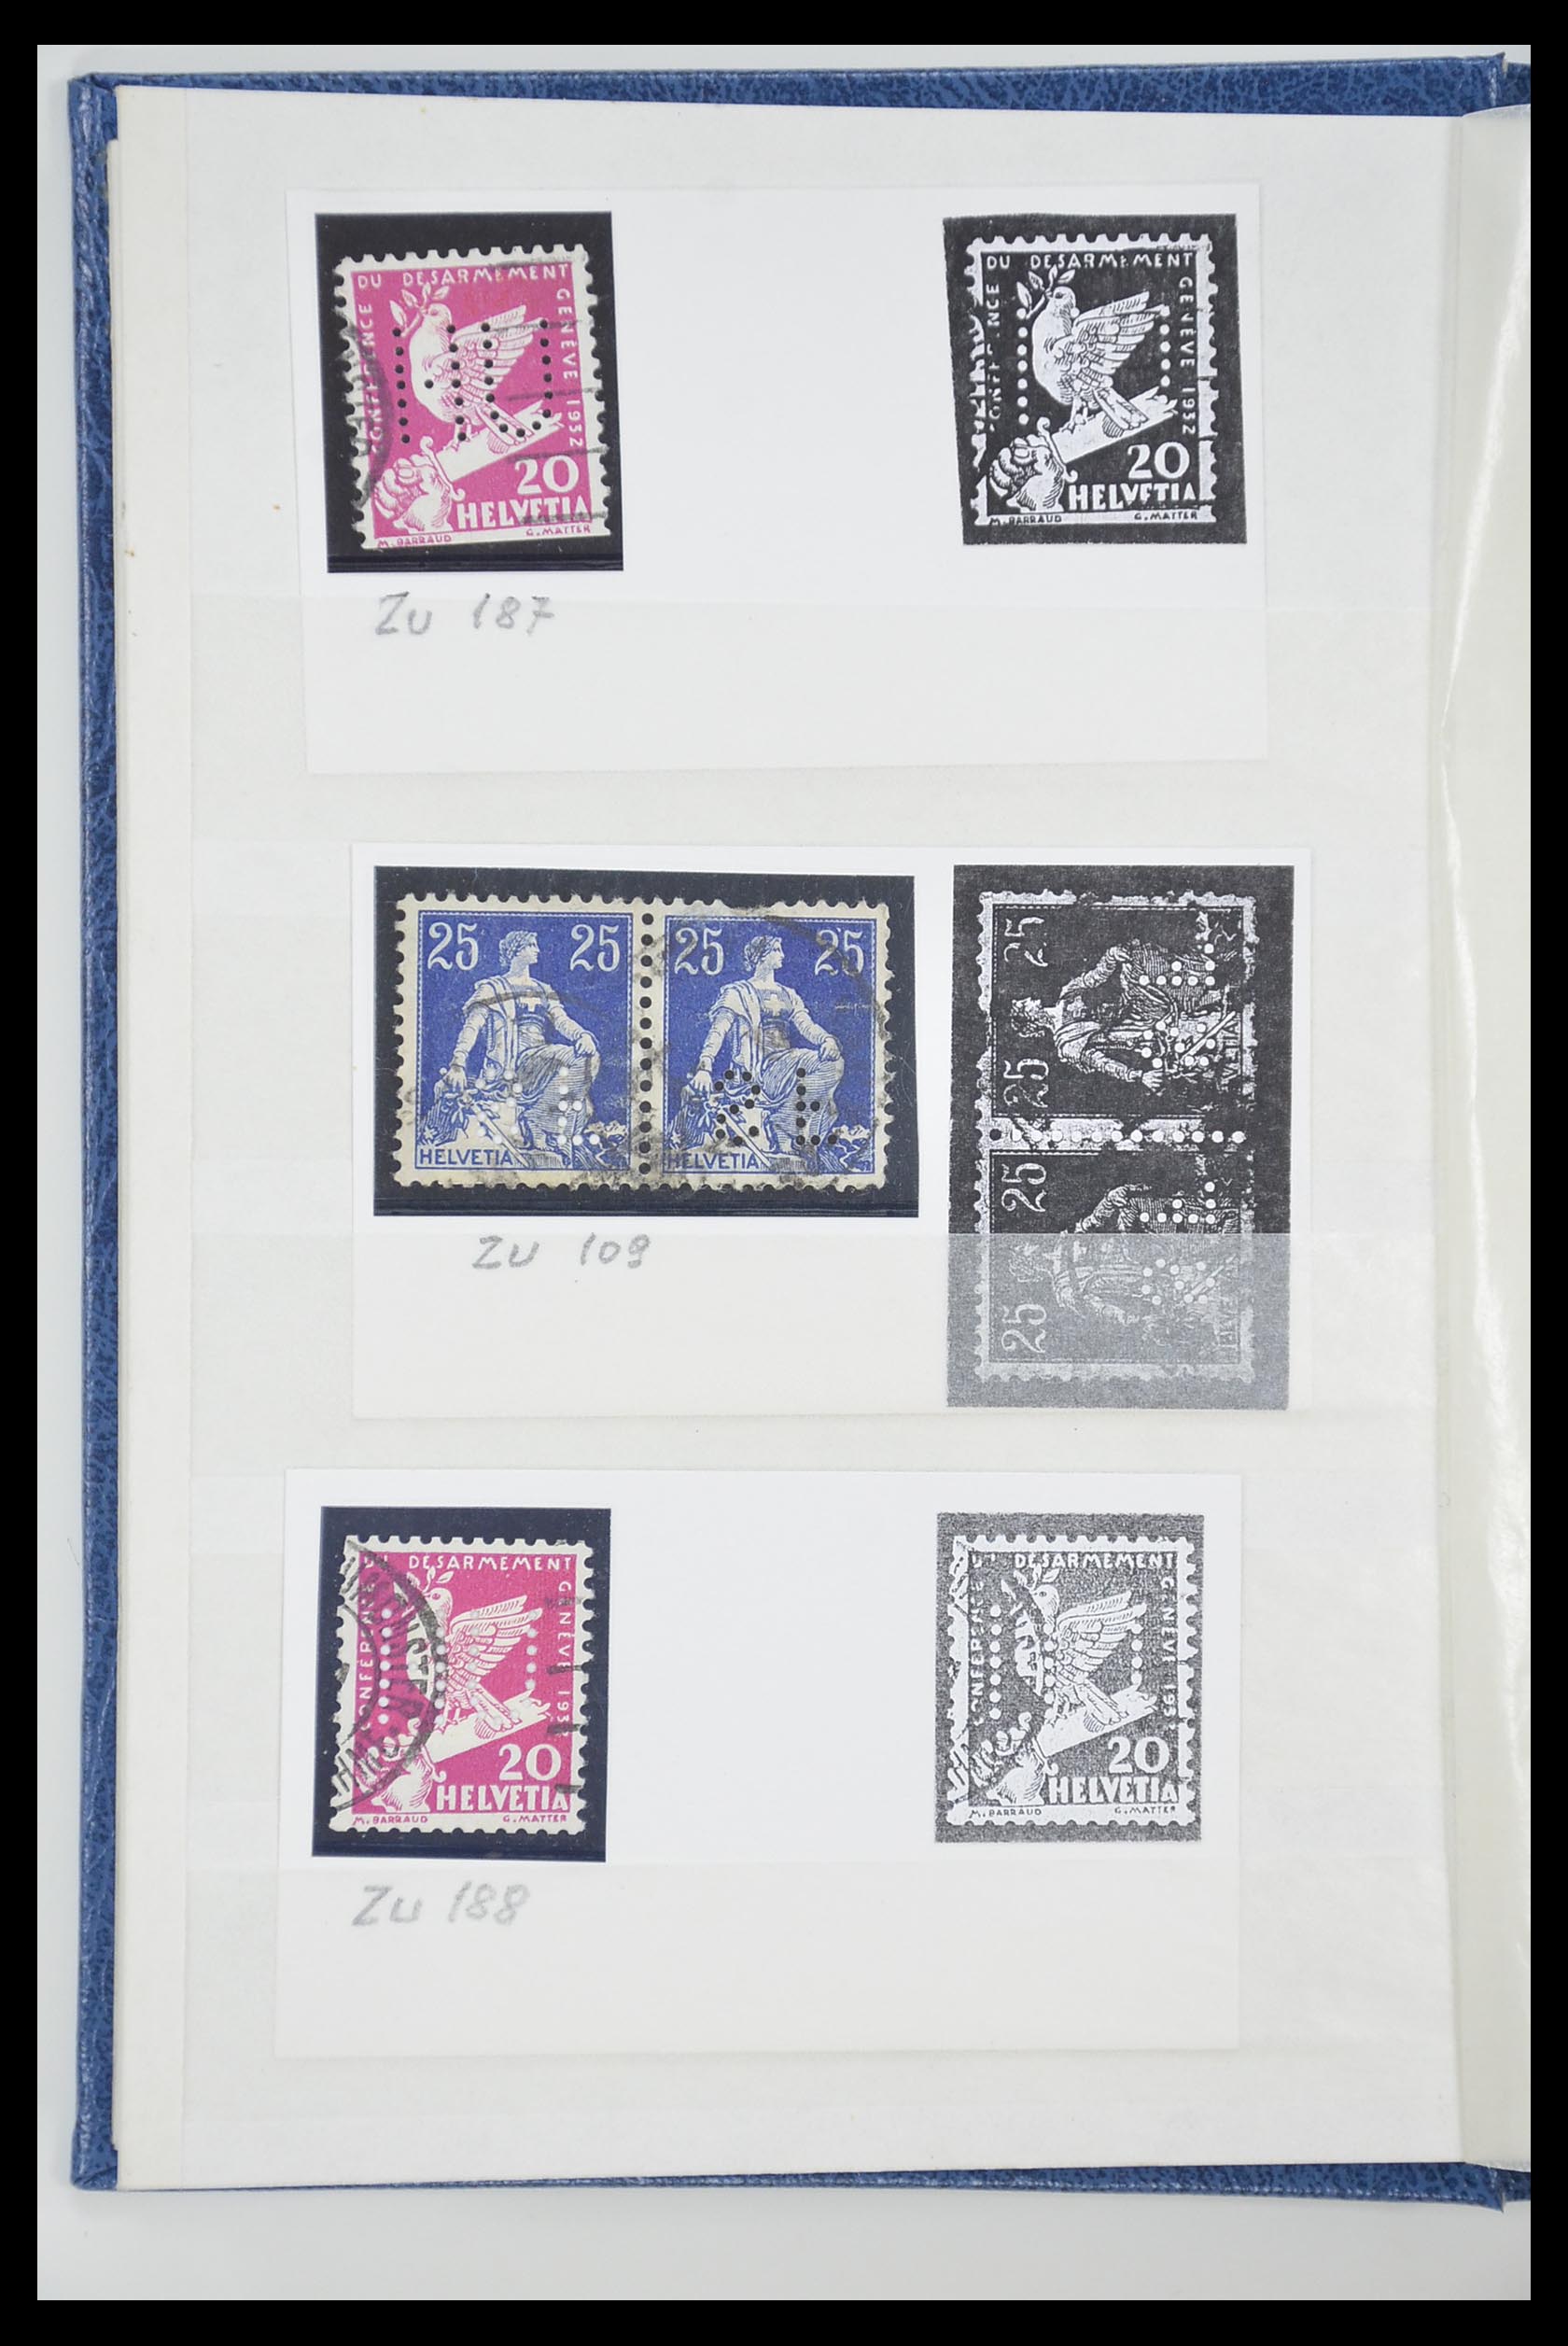 33284 043 - Stamp collection 33284 Switzerland better issues 1900-1995.